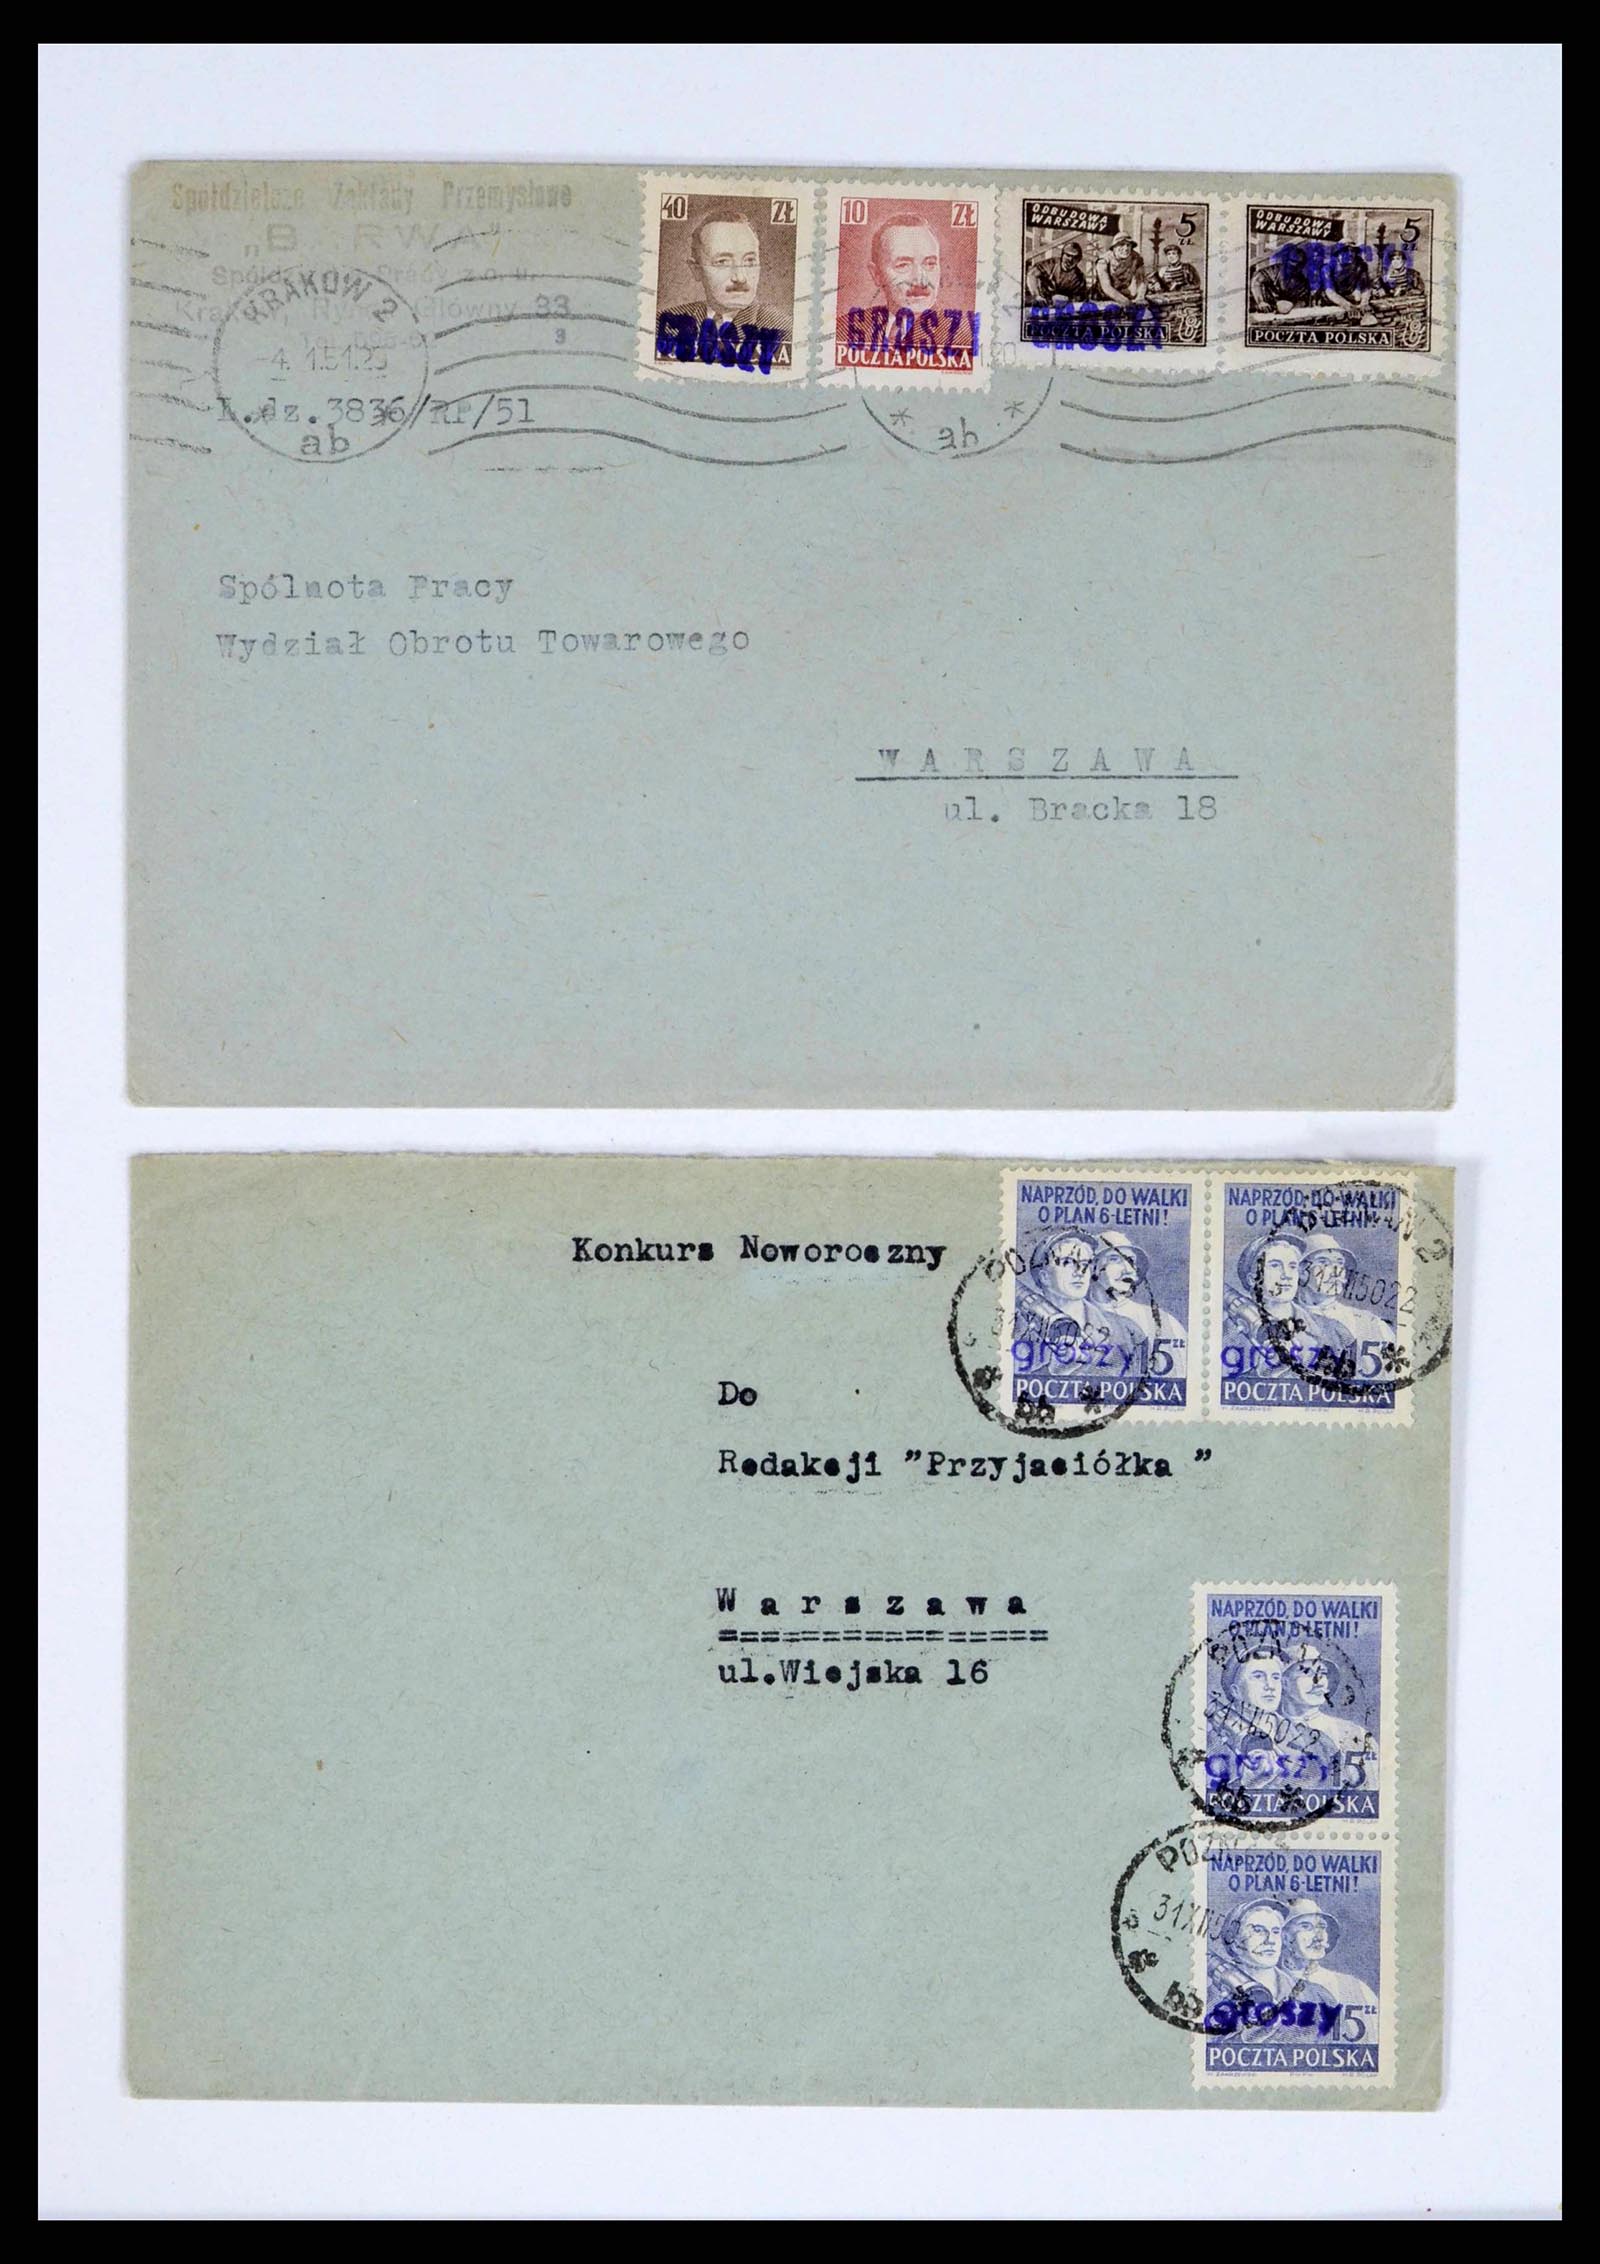 38201 0015 - Stamp collection 38201 Groszy overprints on cover 1950-1951.